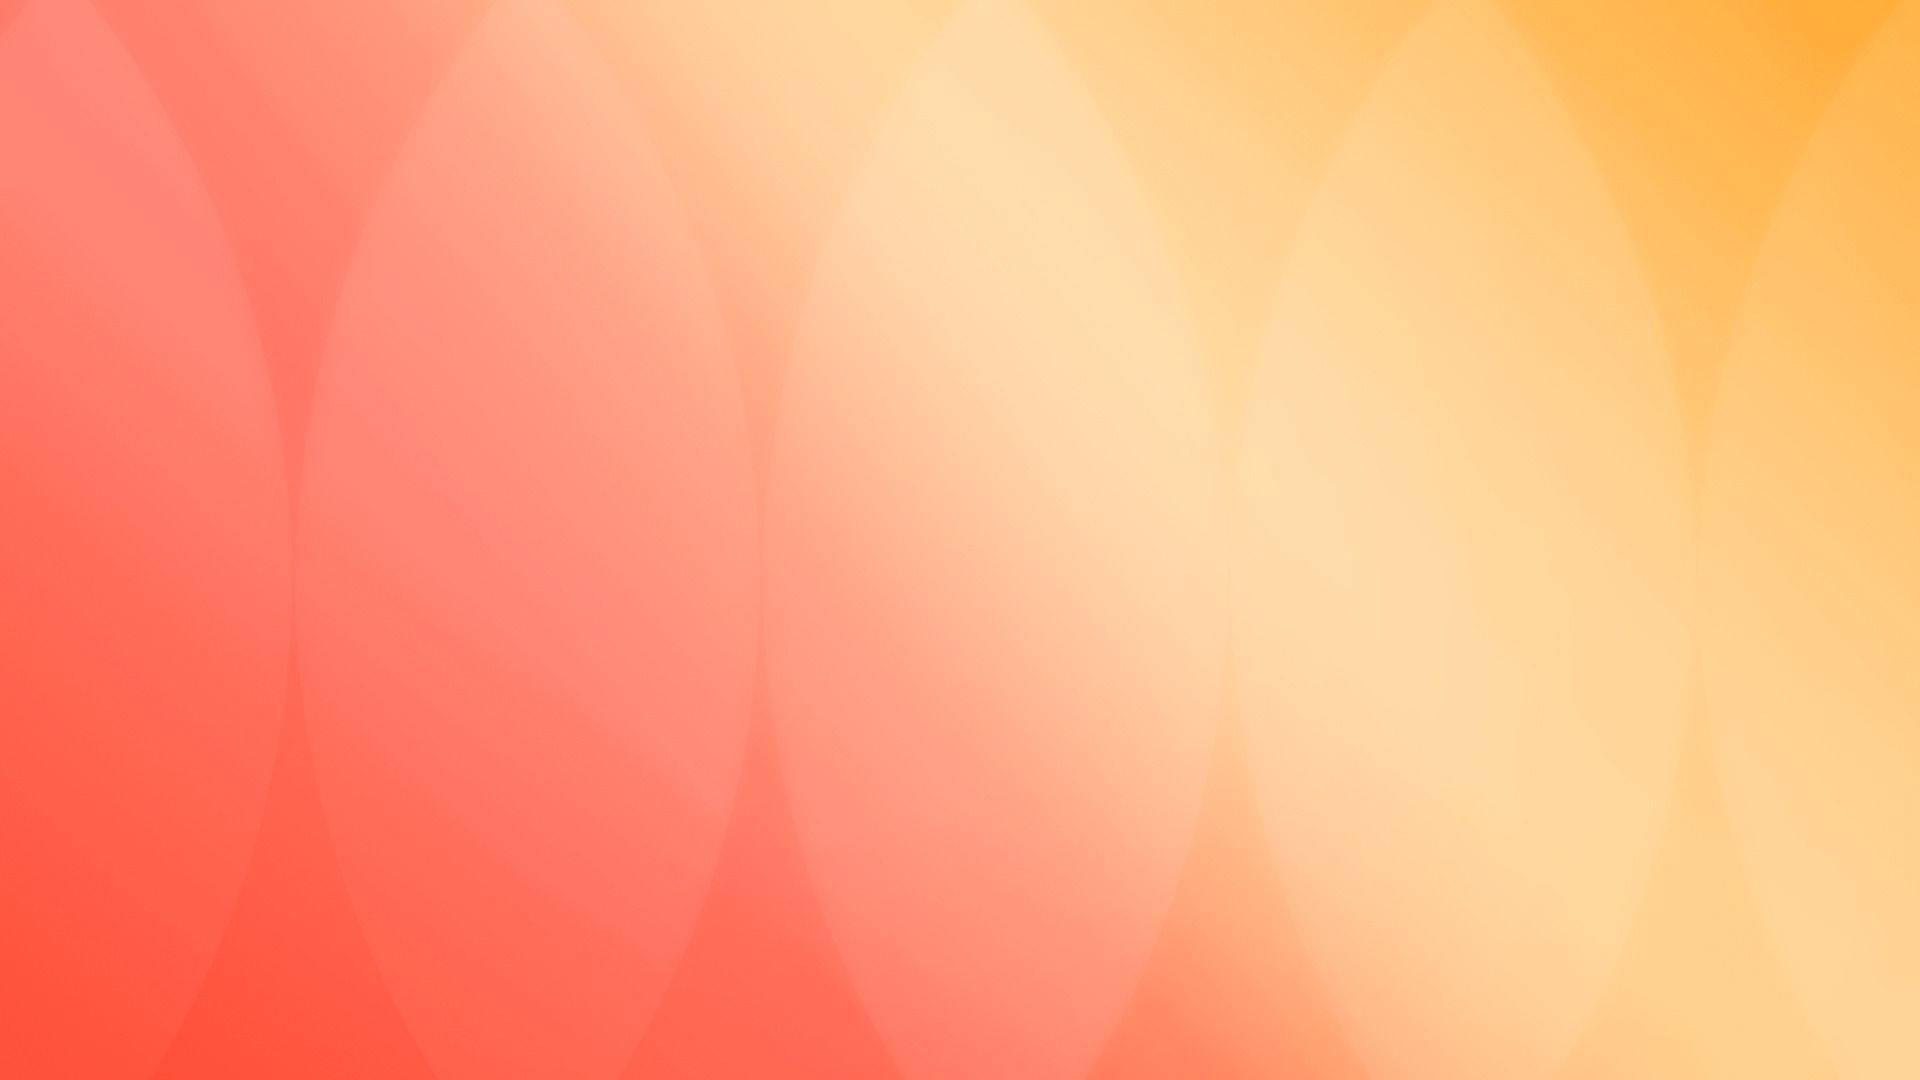 Peach Red Orange Color Wave Overlay Background